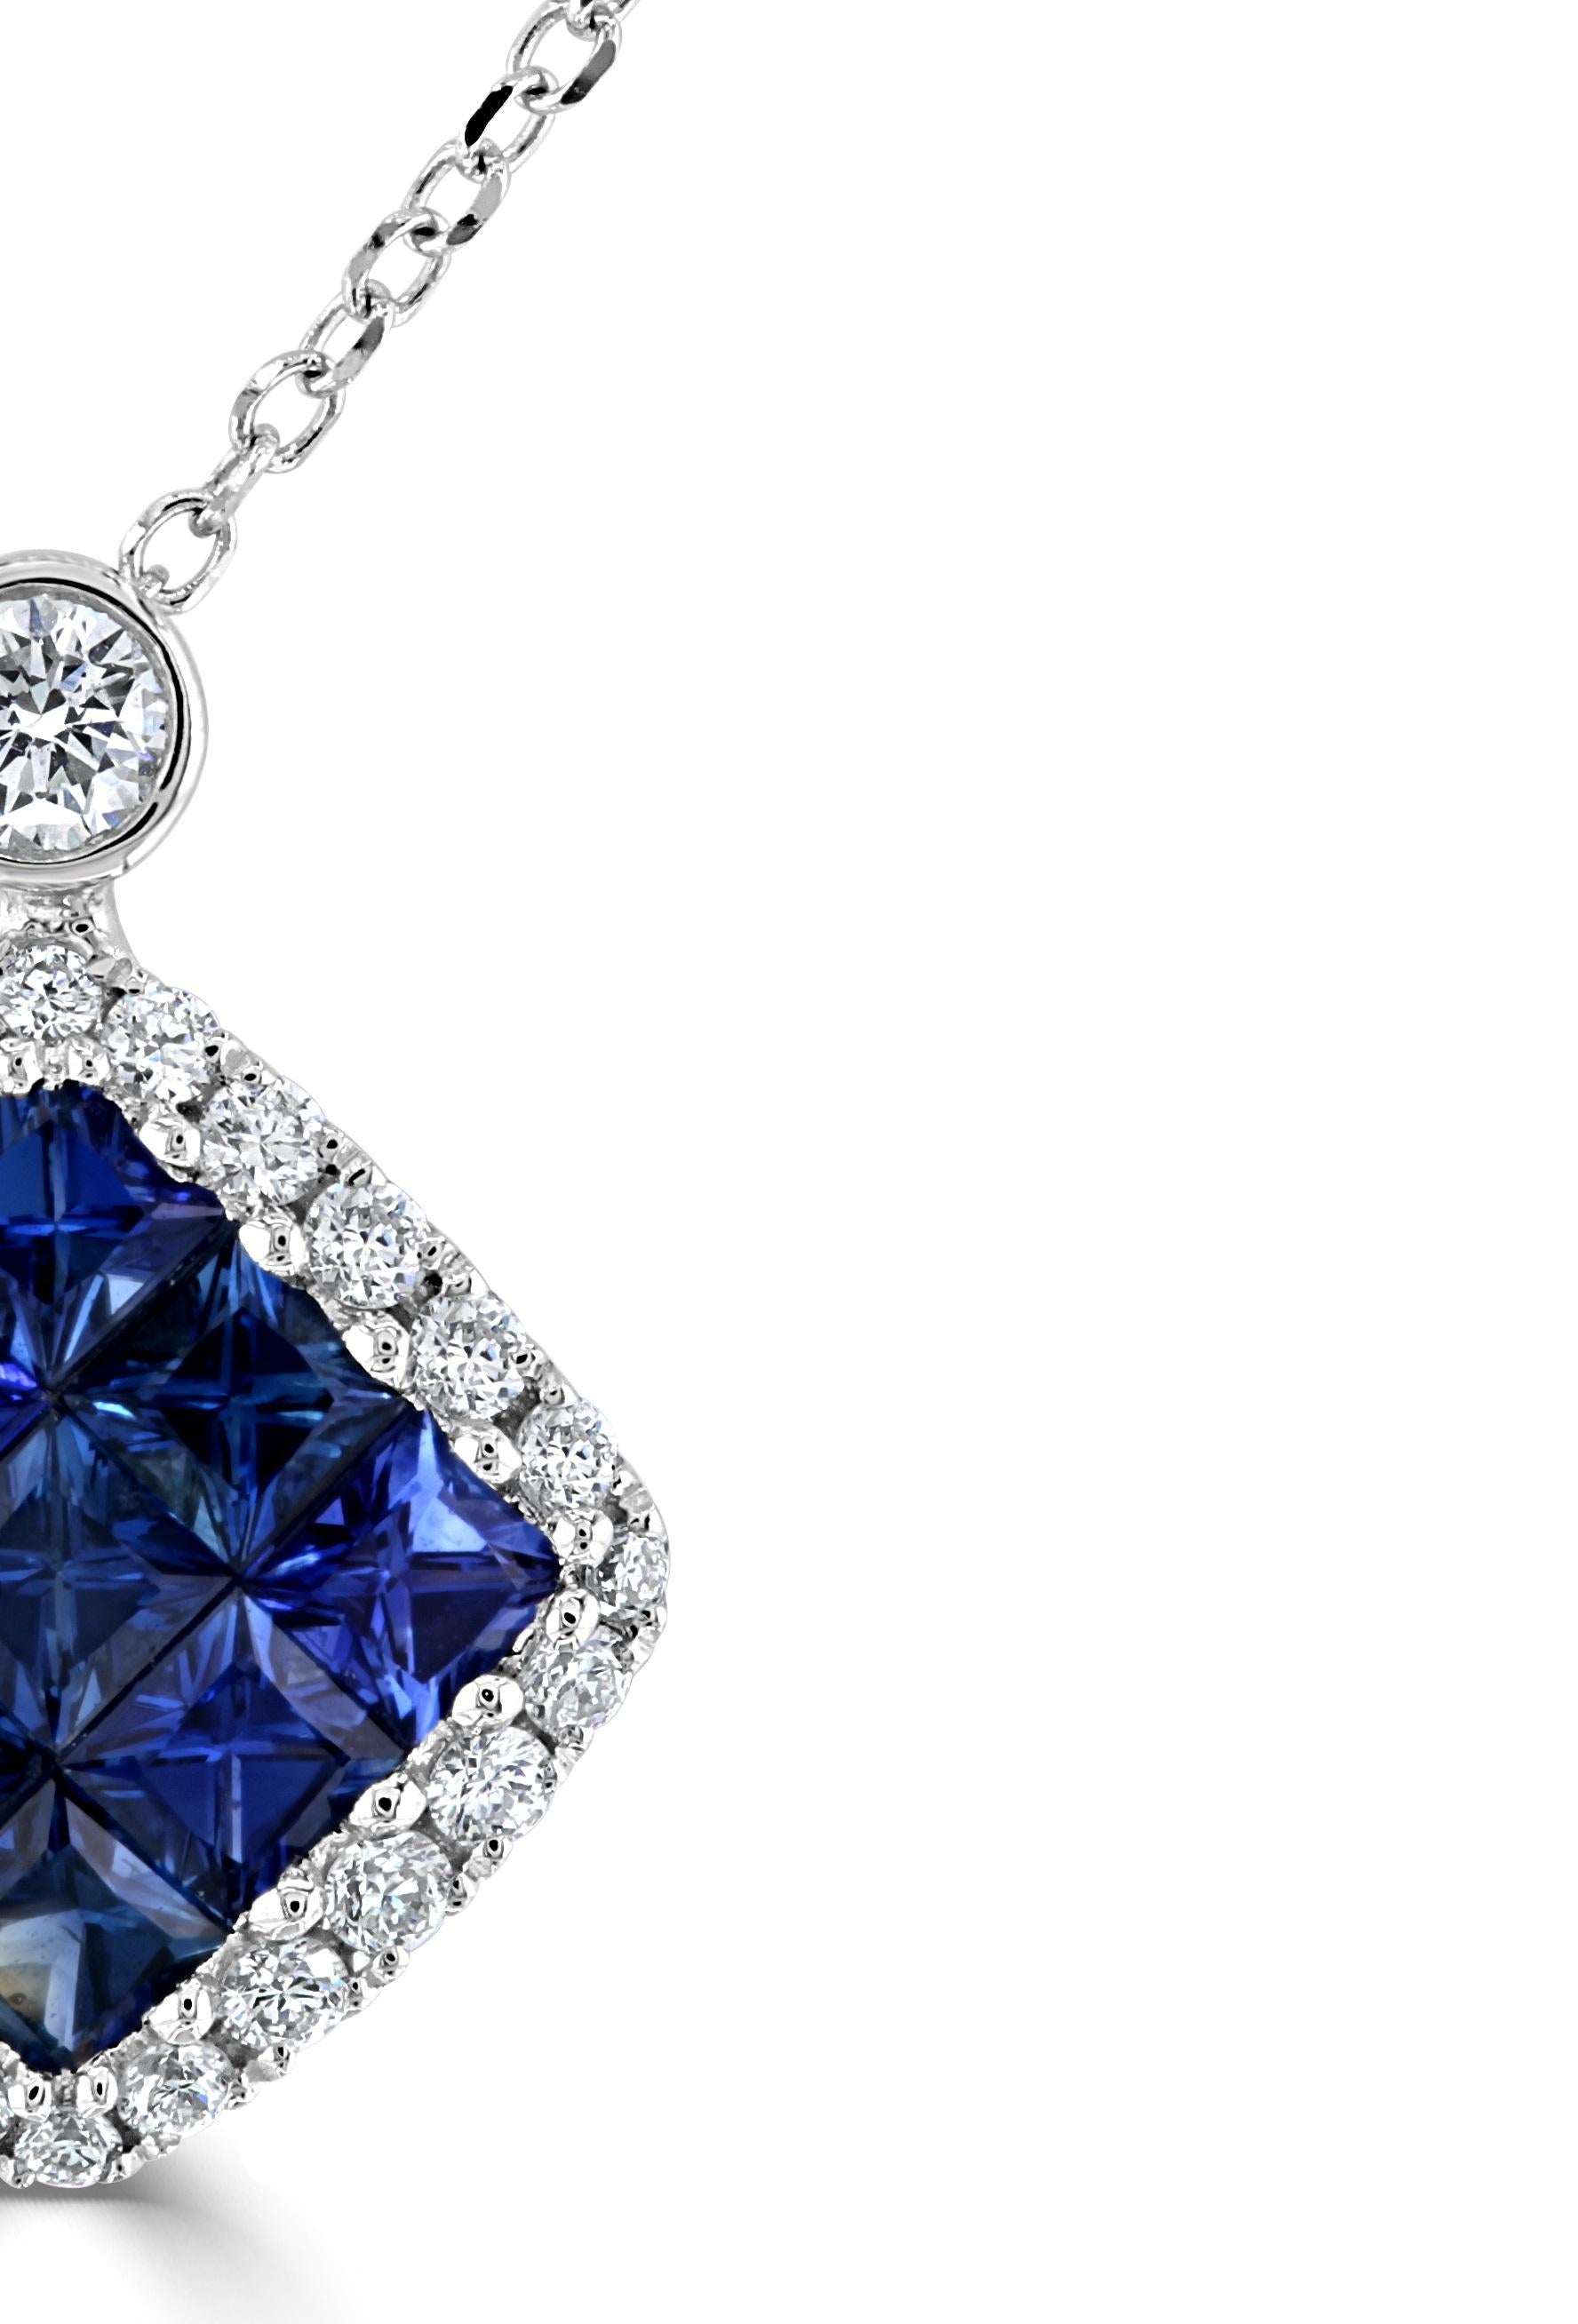 0.74 Carat Blue Sapphire and 0.21 Carat Diamond Pendant in 18k White ref1461 In New Condition For Sale In New York, NY